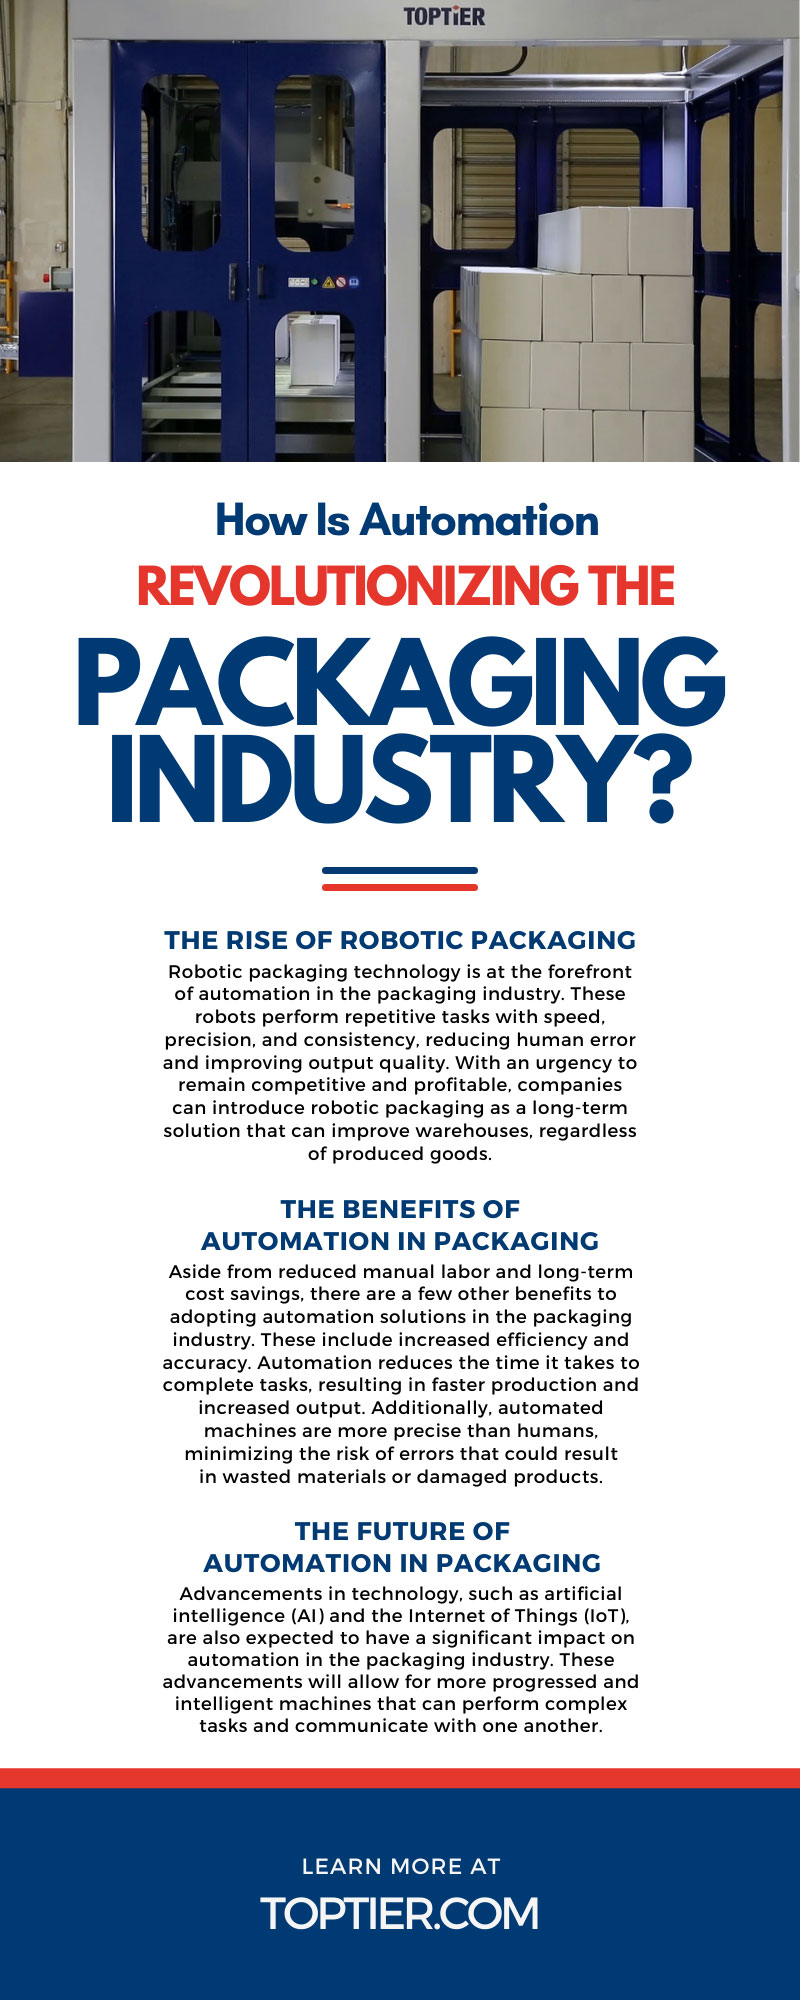 How Is Automation Revolutionizing the Packaging Industry?